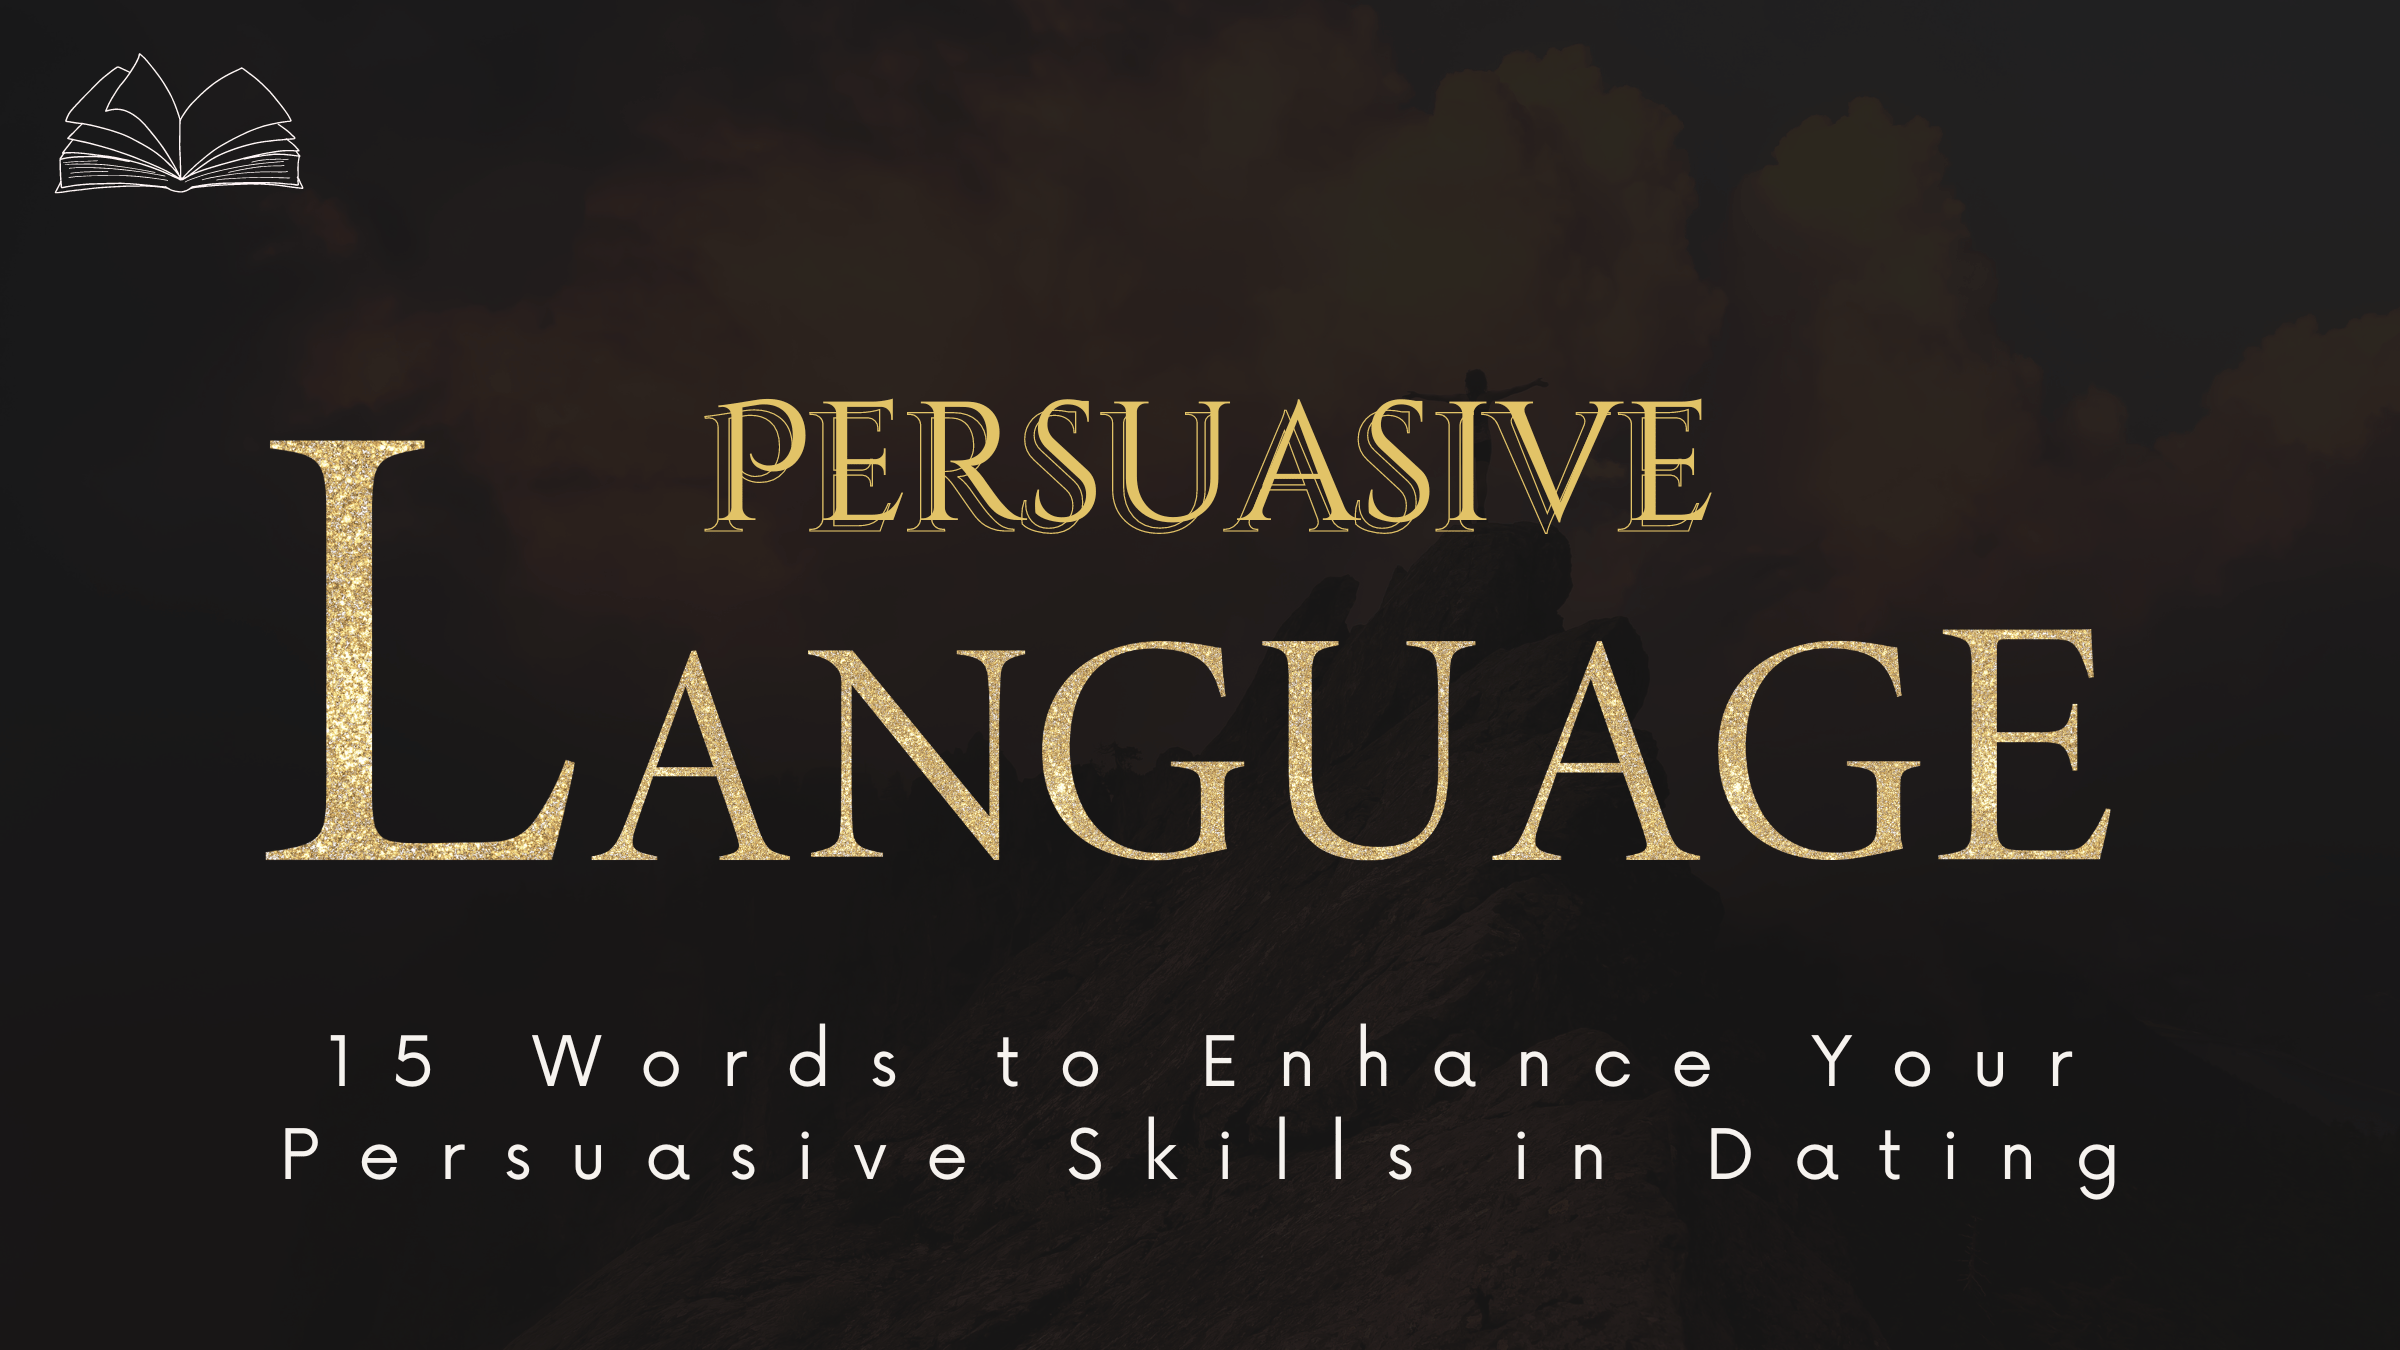 15 Words to Enhance Your Persuasive Skills in Dating